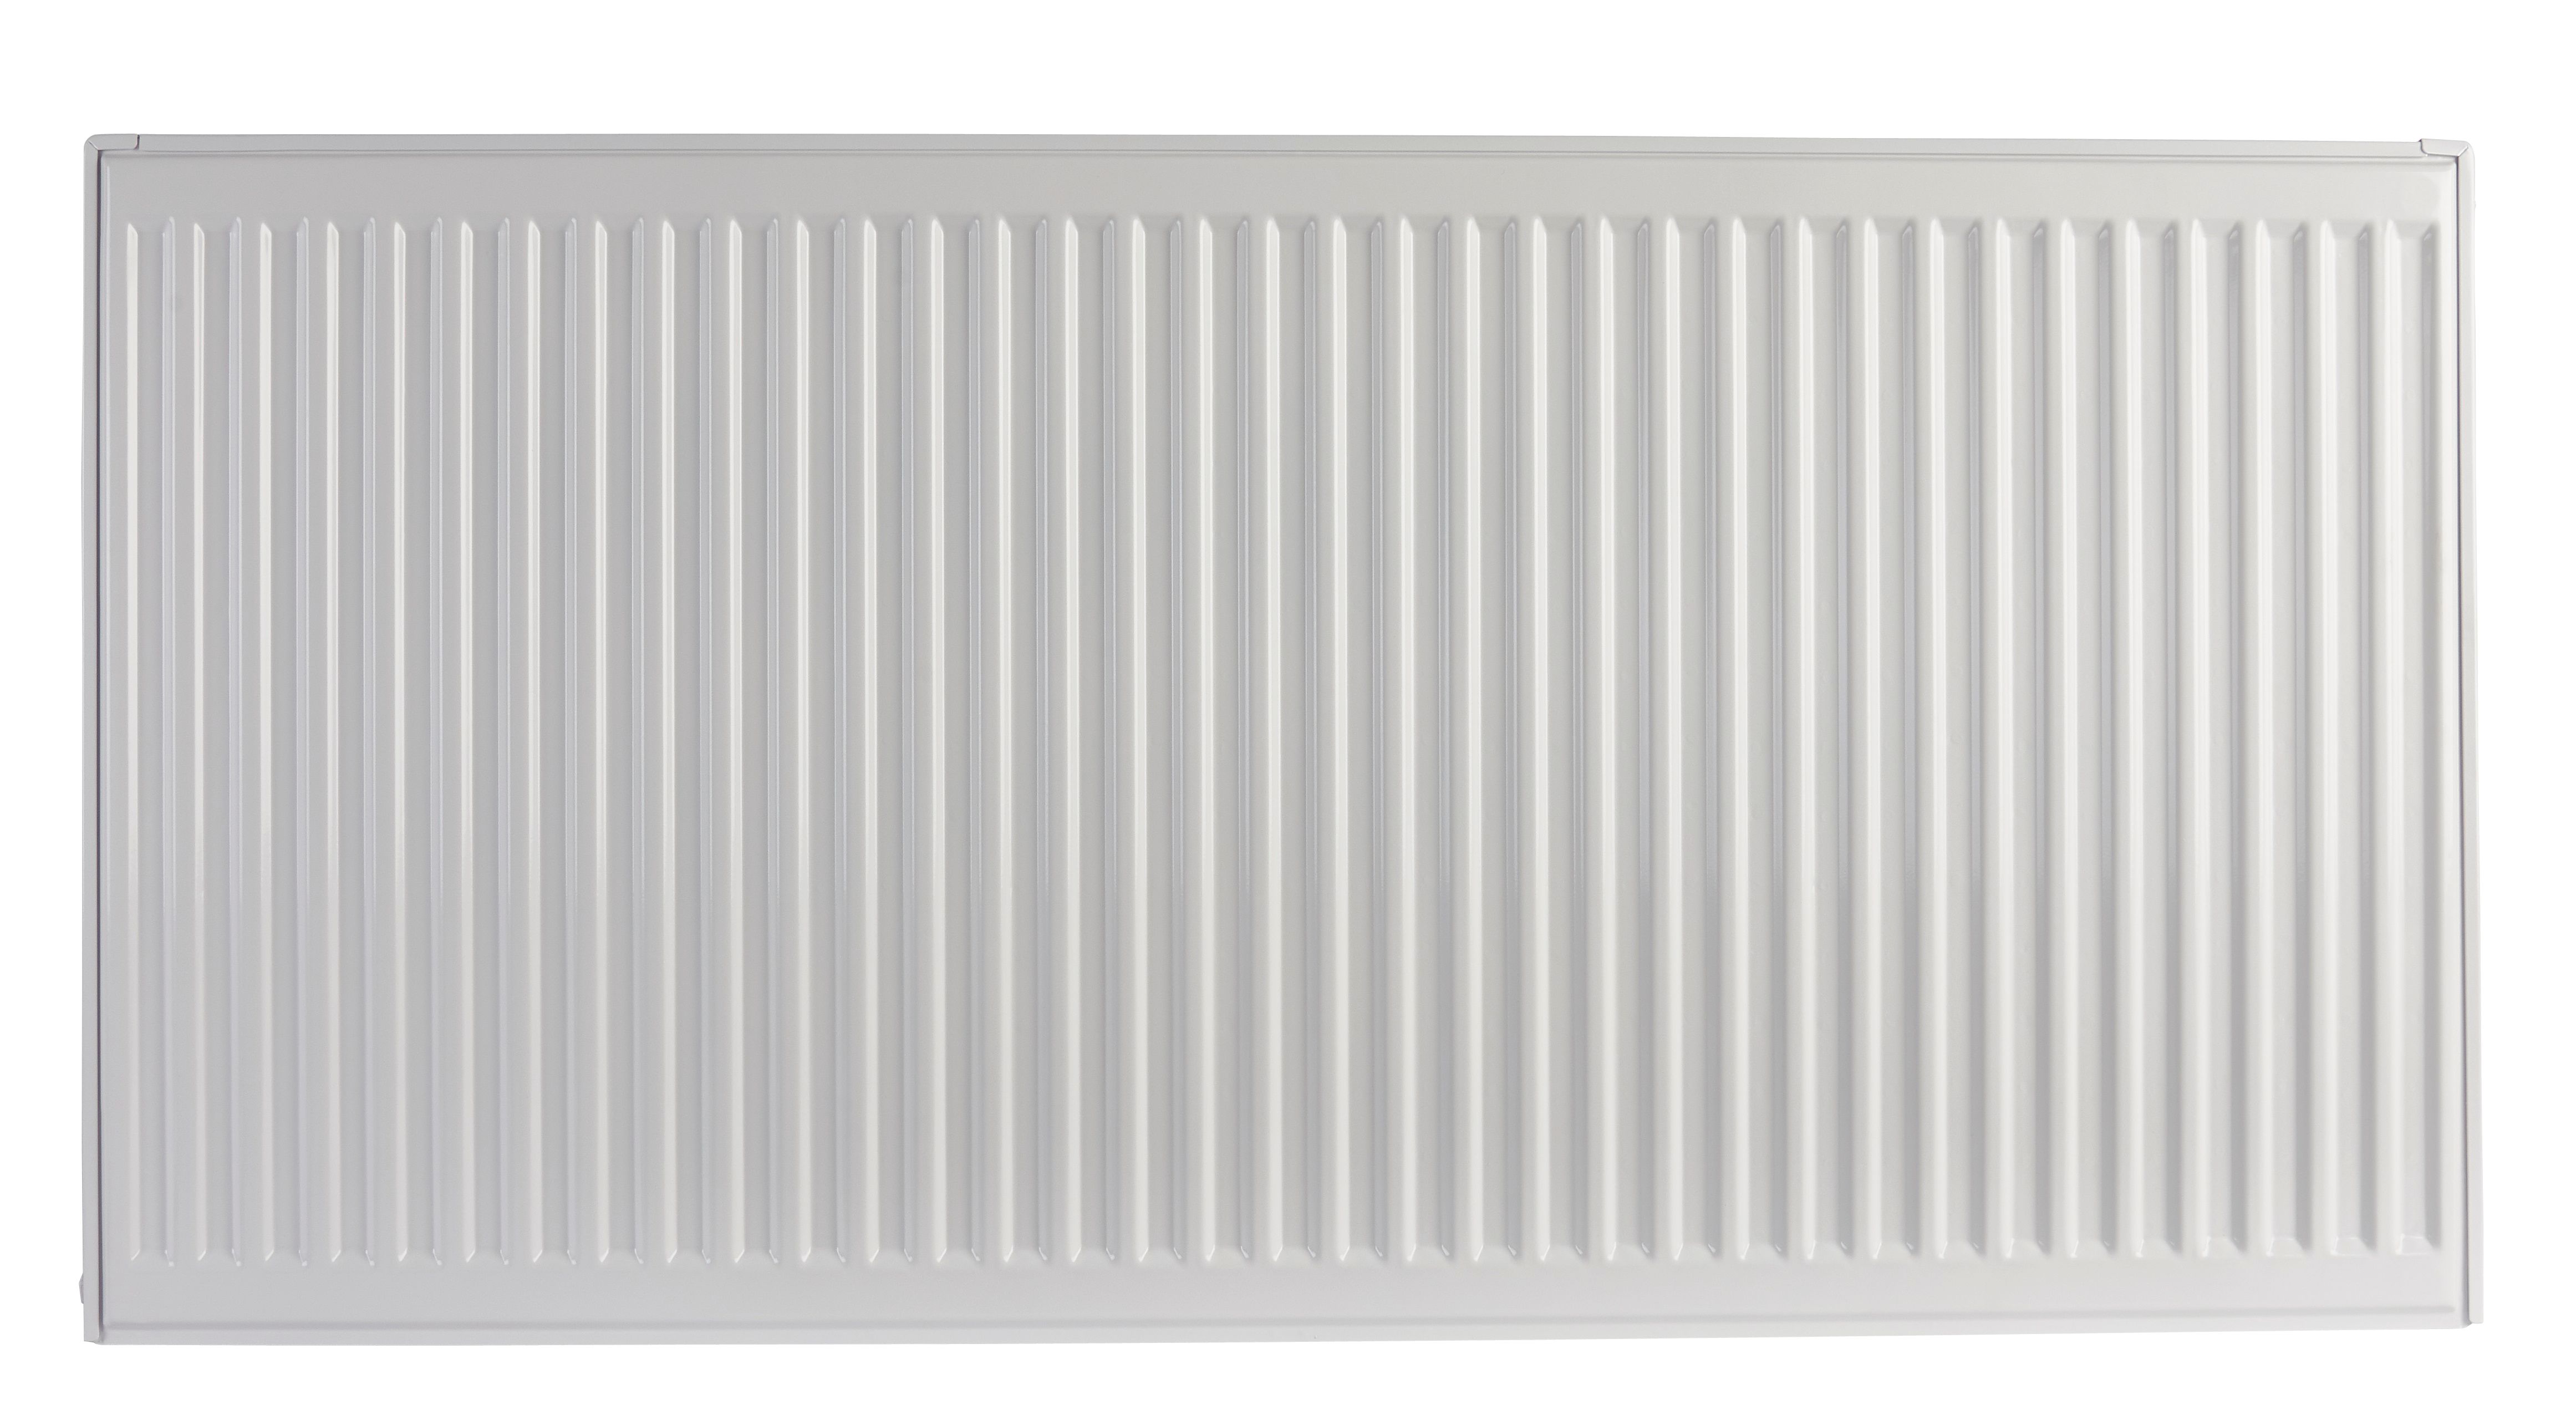 Image of Homeline by Stelrad 500 x 400mm Type 11 Single Panel Single Convector Radiator